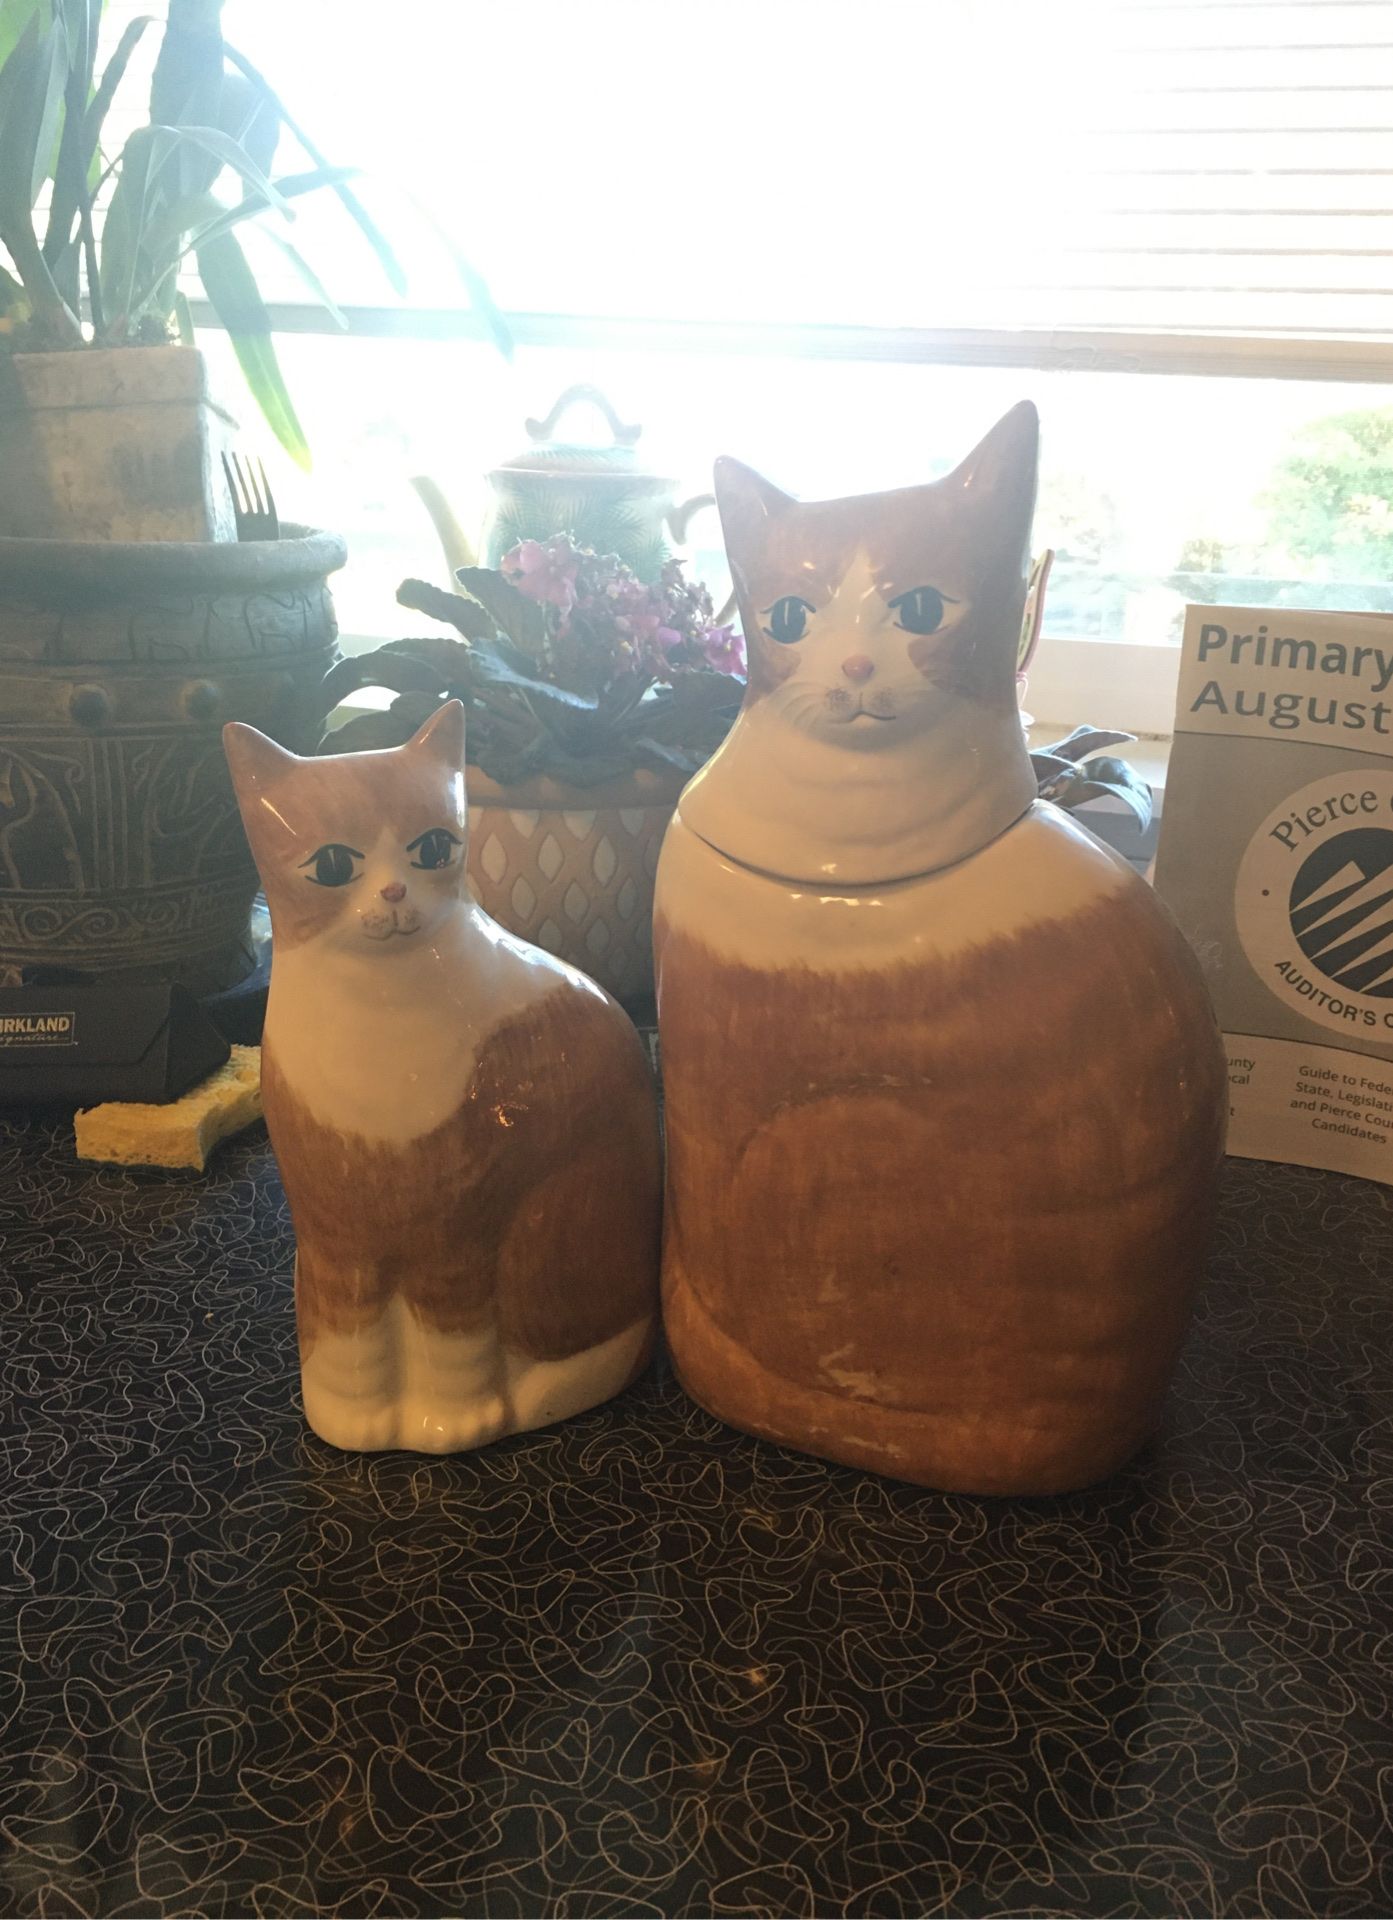 Full sized cookie jar and matching statue